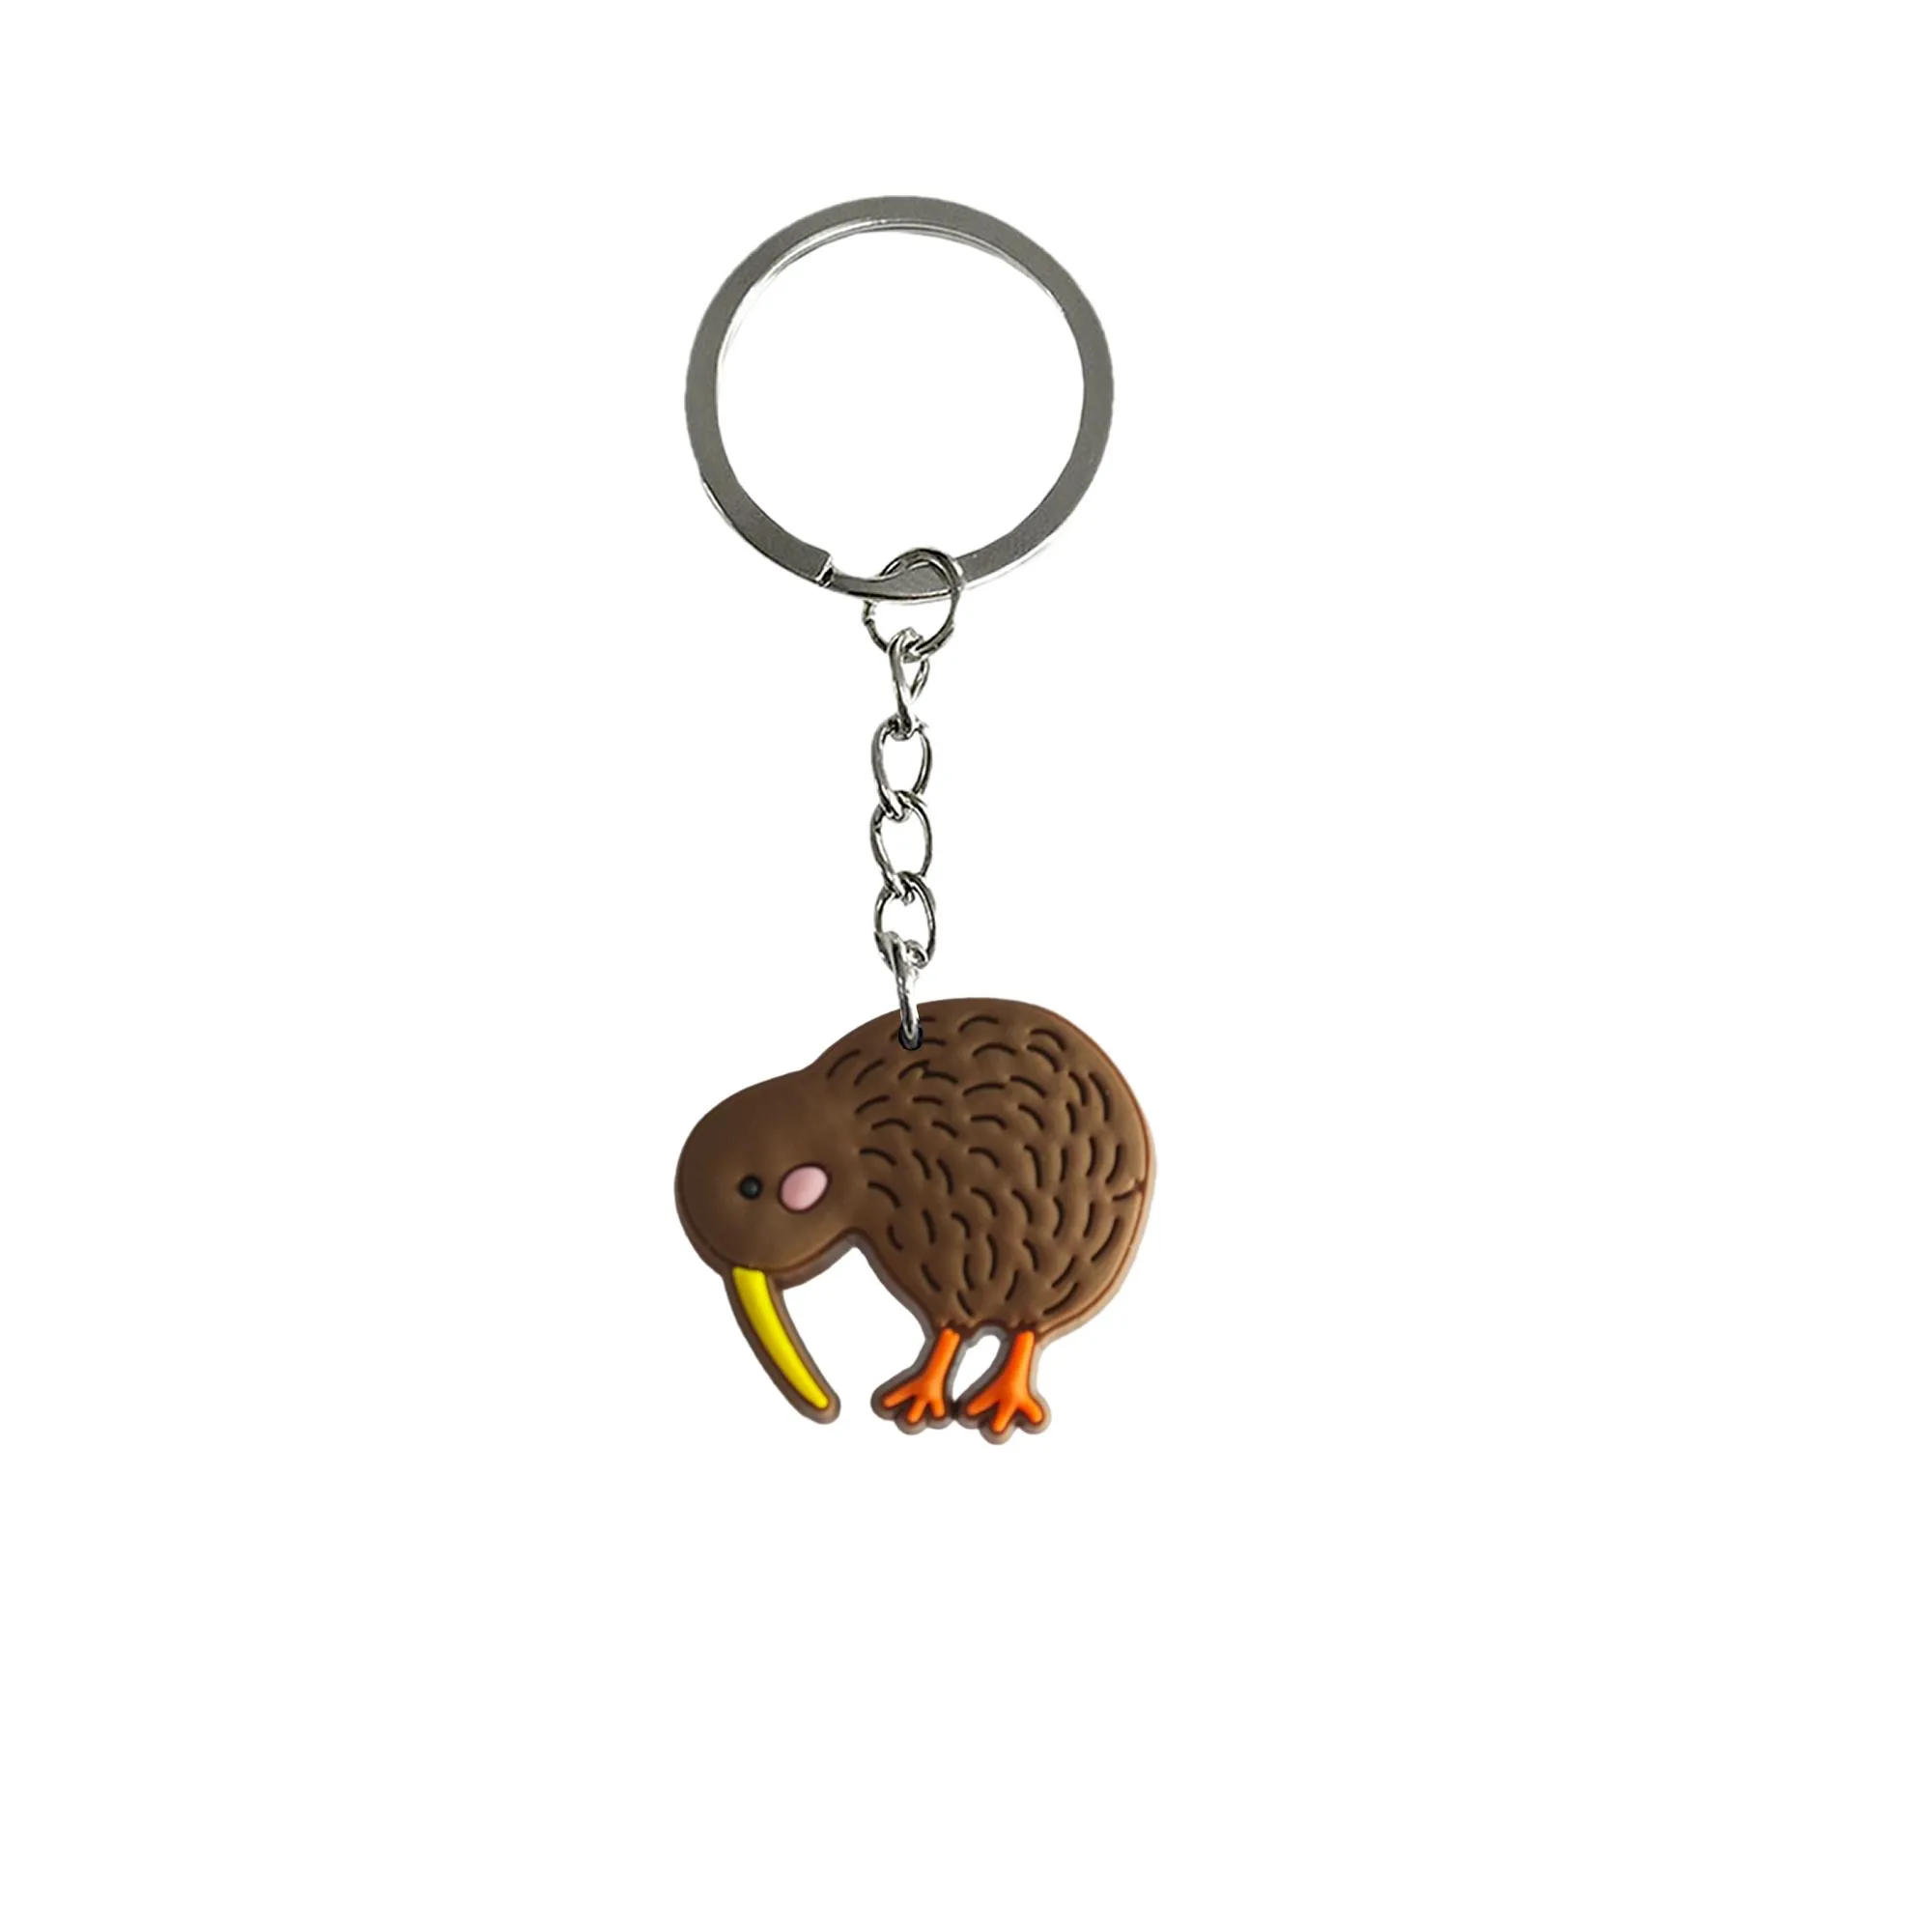 bird keychain keyrings for bags keychains boys party favors keyring suitable schoolbag key chain accessories backpack handbag and car gift valentines day girls tags goodie bag stuffer christmas gifts holiday charms